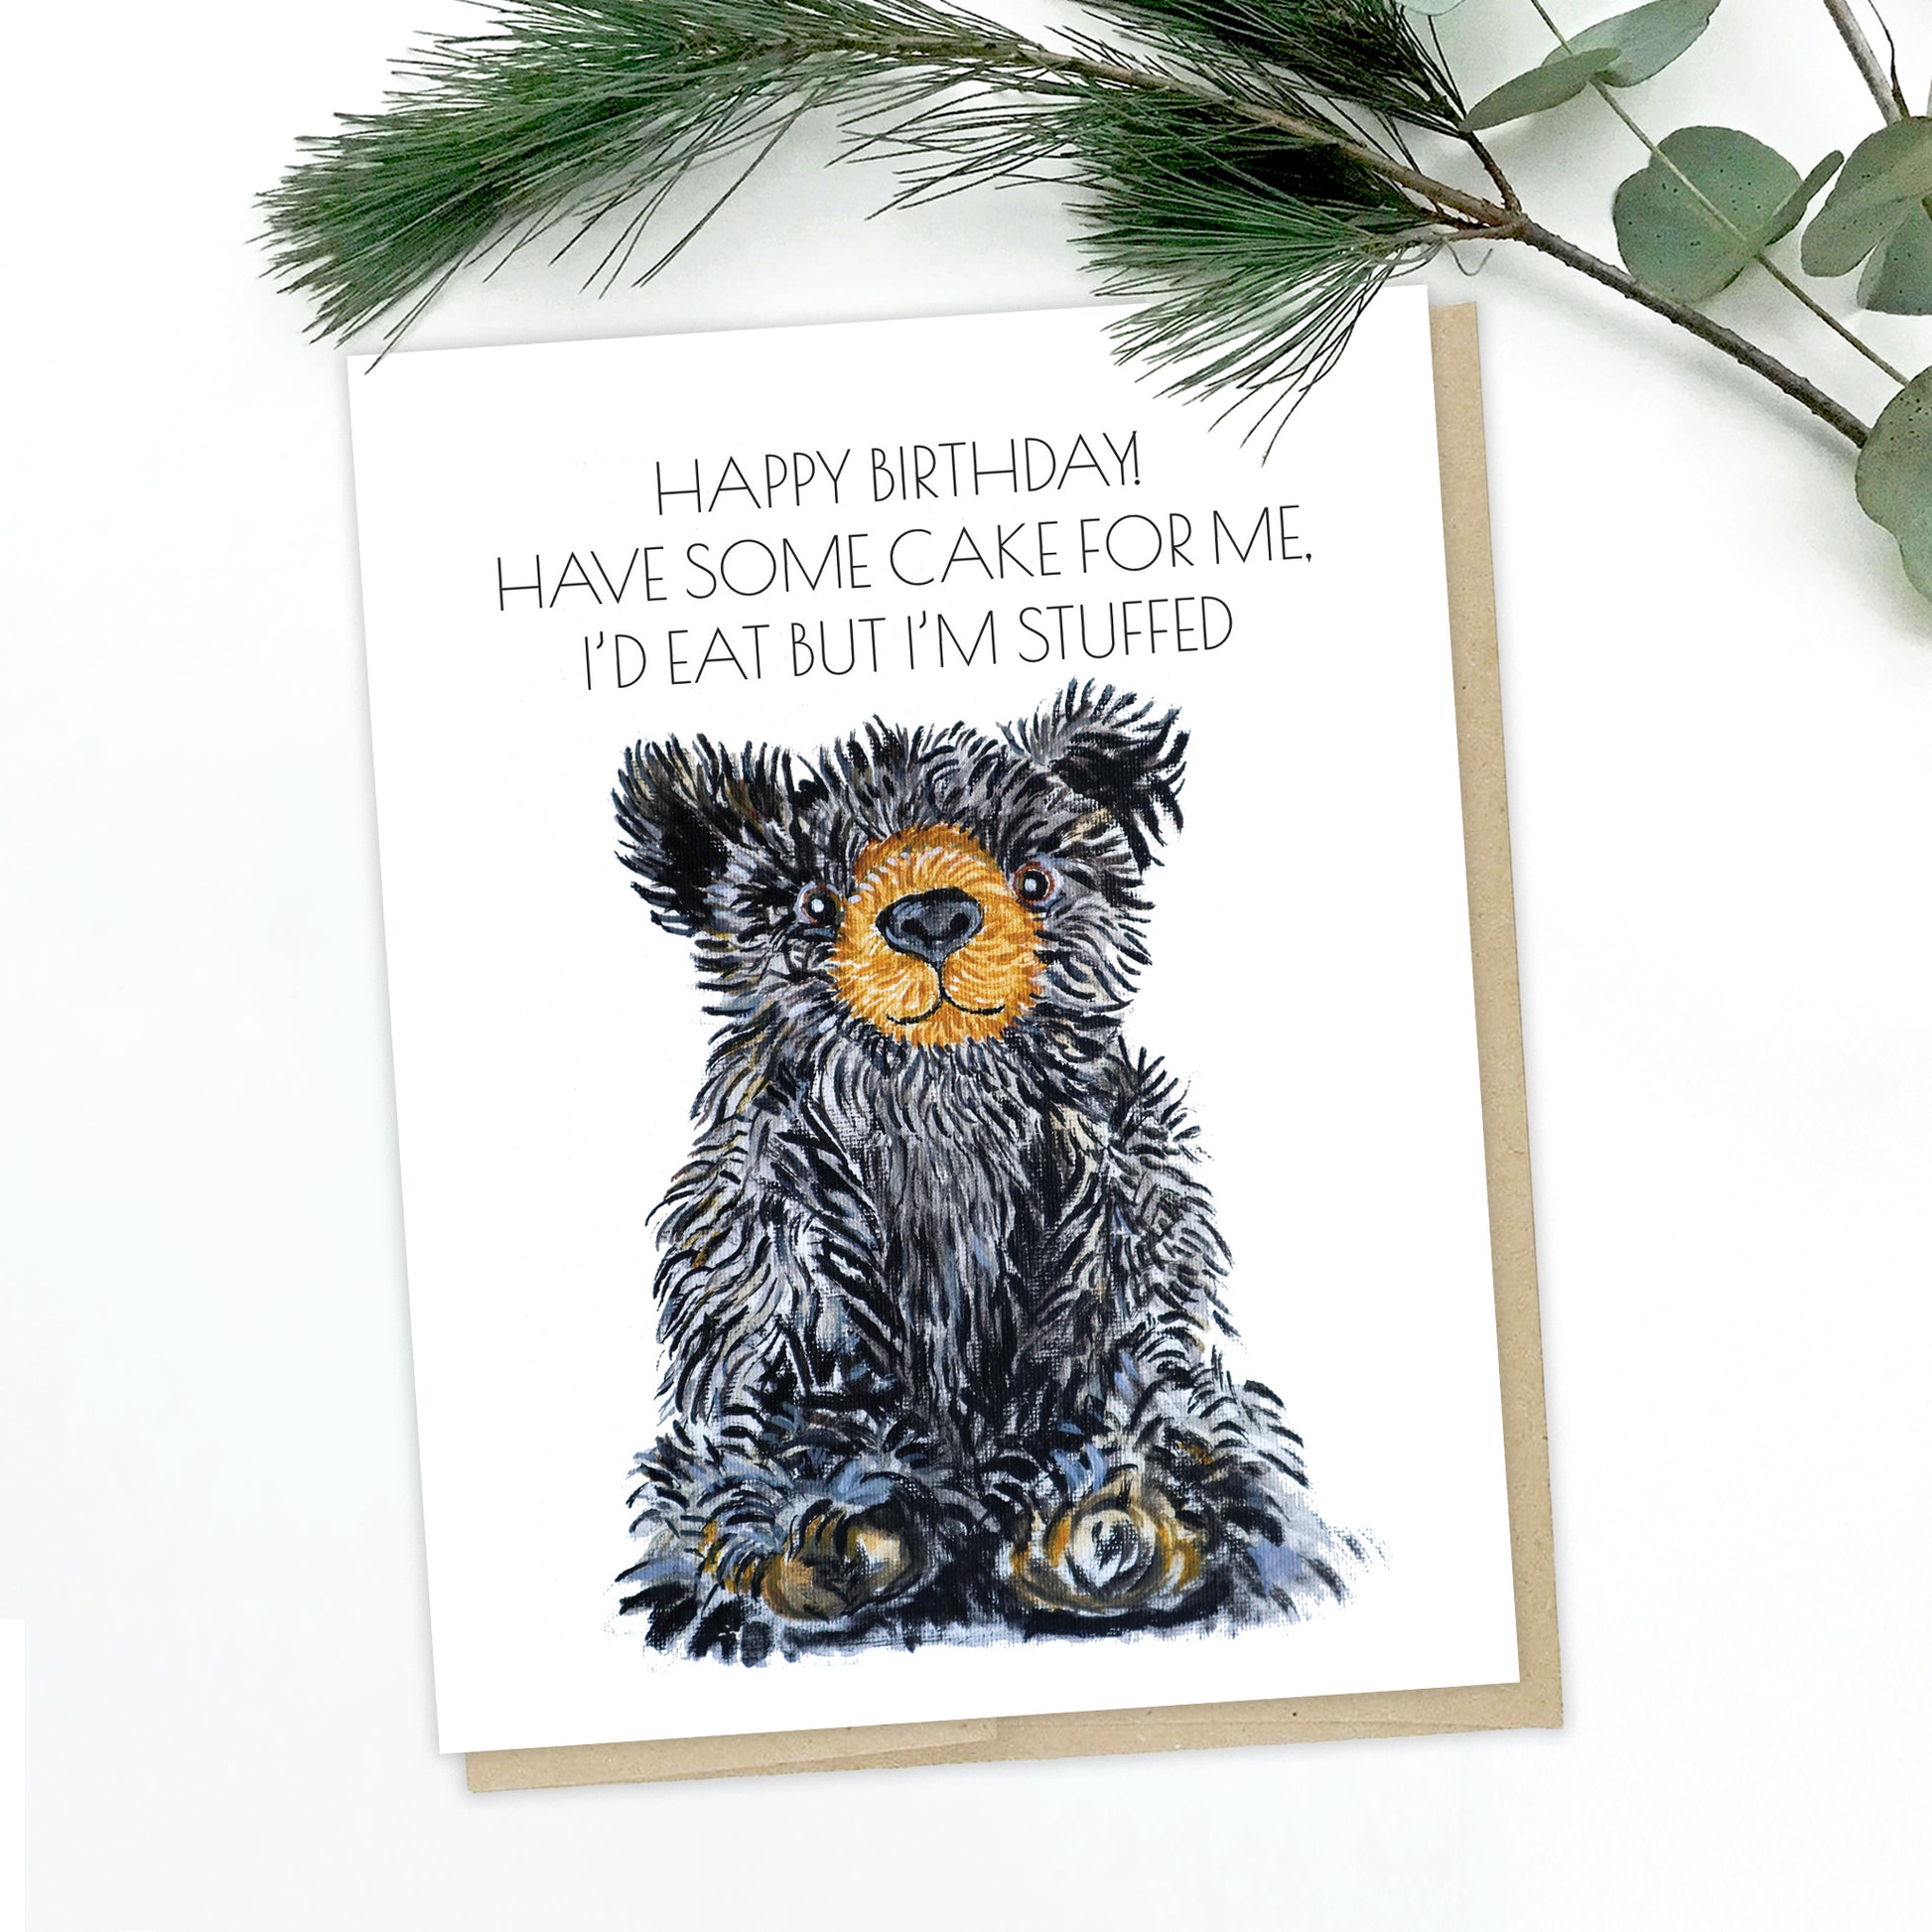 A picture of a teddy bear greeting card. The bear is black with perky ears, a brown snout and brown/white paws. The text reads: happy birthday! have some cake for me. I'd eat but I'm stuffed.